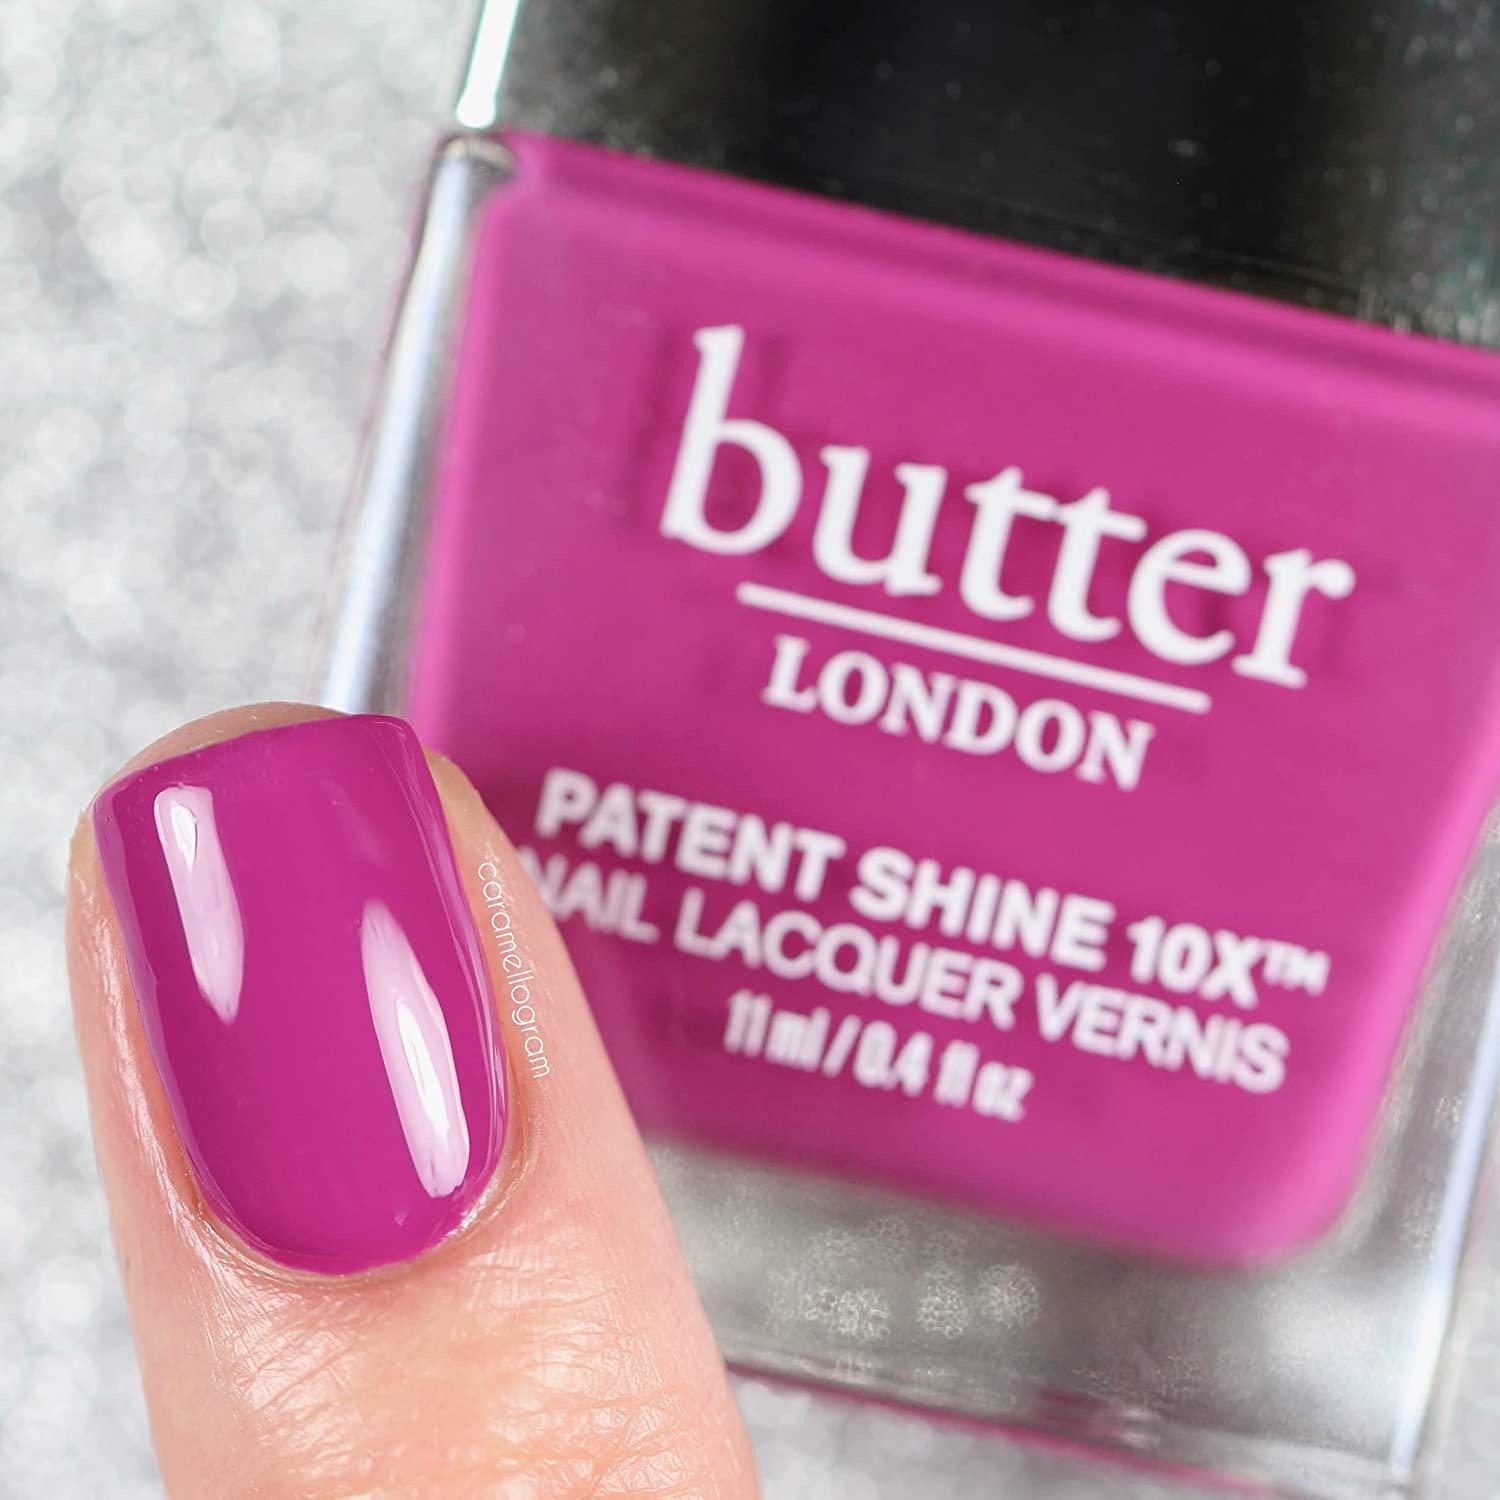 Butter London Cotton Buds Patent Shine 10X Nail Lacquer - Totality Medispa  and Skincare